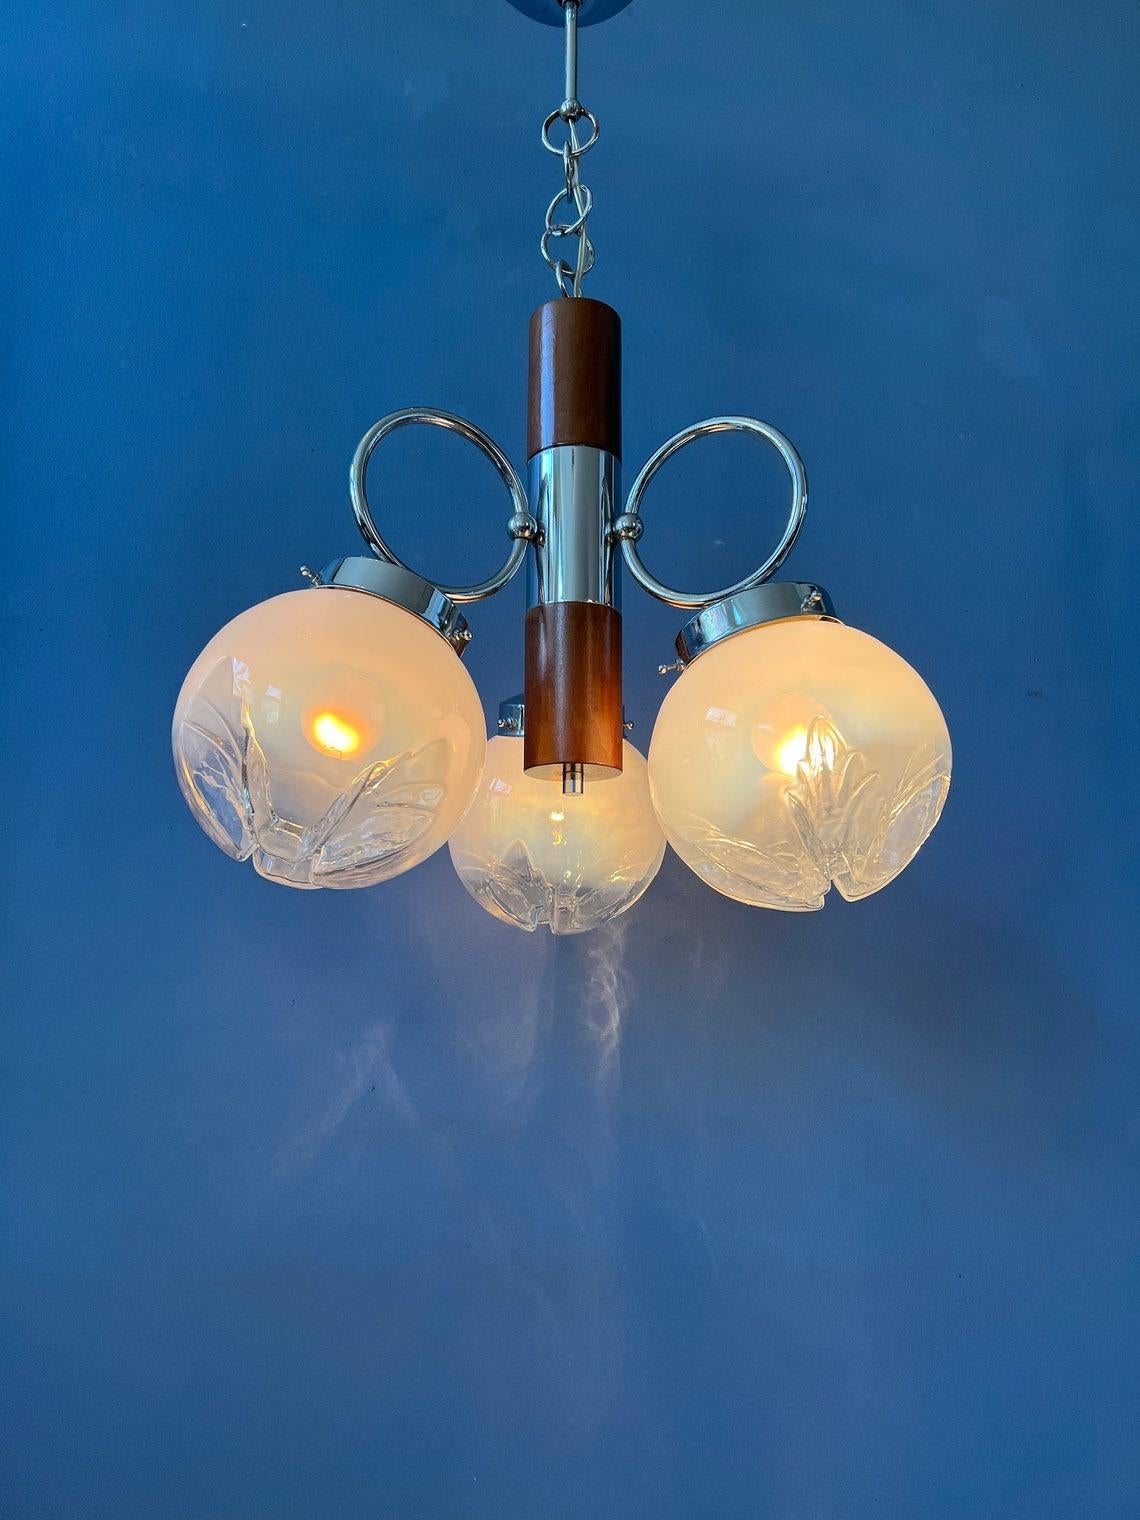 A classic murano chandelier by or in style of Mazzega. The lamps has three glass made shades and has a chrome frame with a wooden element. The lamp requires three E14 lightbulbs.

Additional information:
Materials: Glass, Metal 
Period: